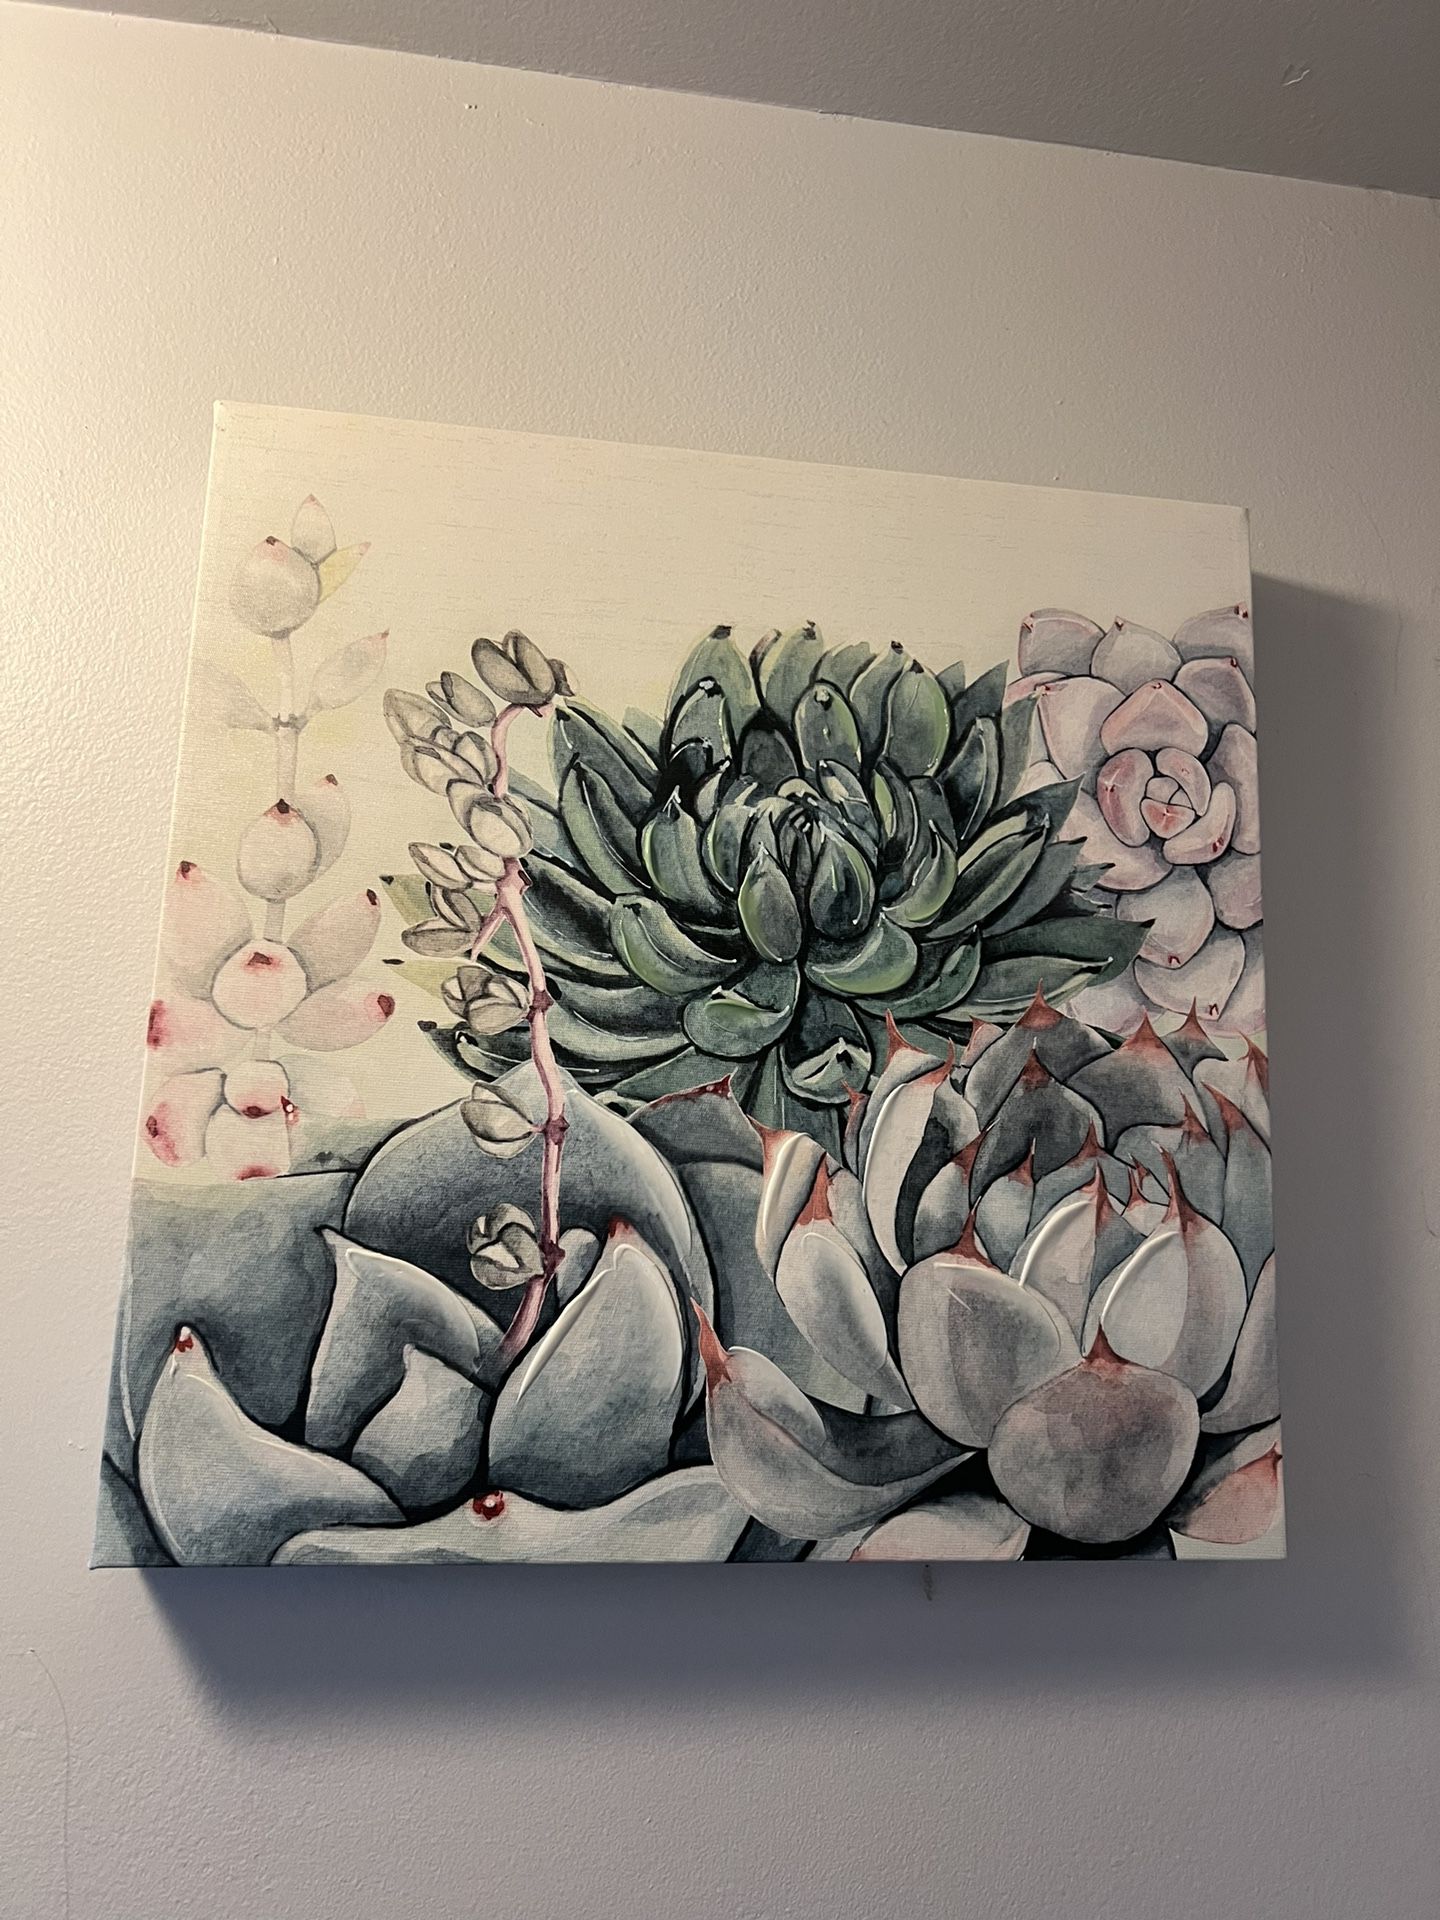 Two Succulent Wall Decor 